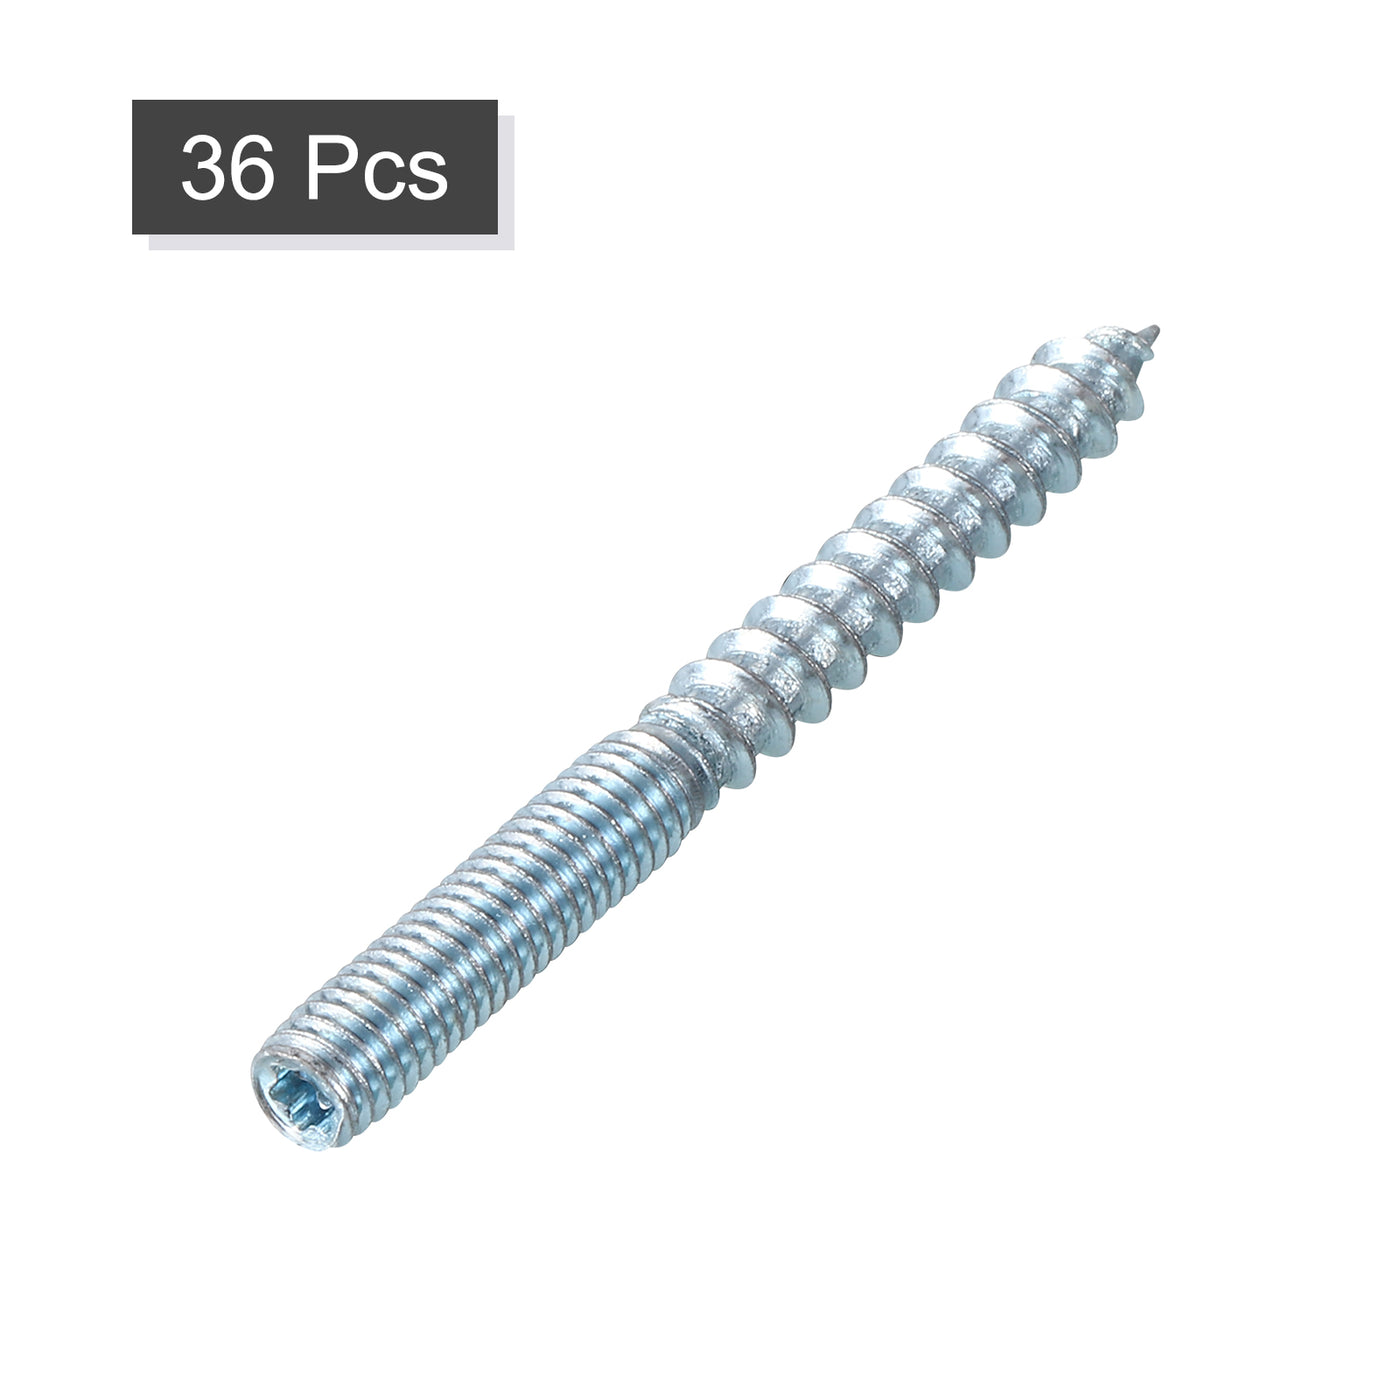 uxcell Uxcell 36Pcs M6x60mm Hanger Bolt Double Headed Bolt Self-Tapping Screw for Furniture